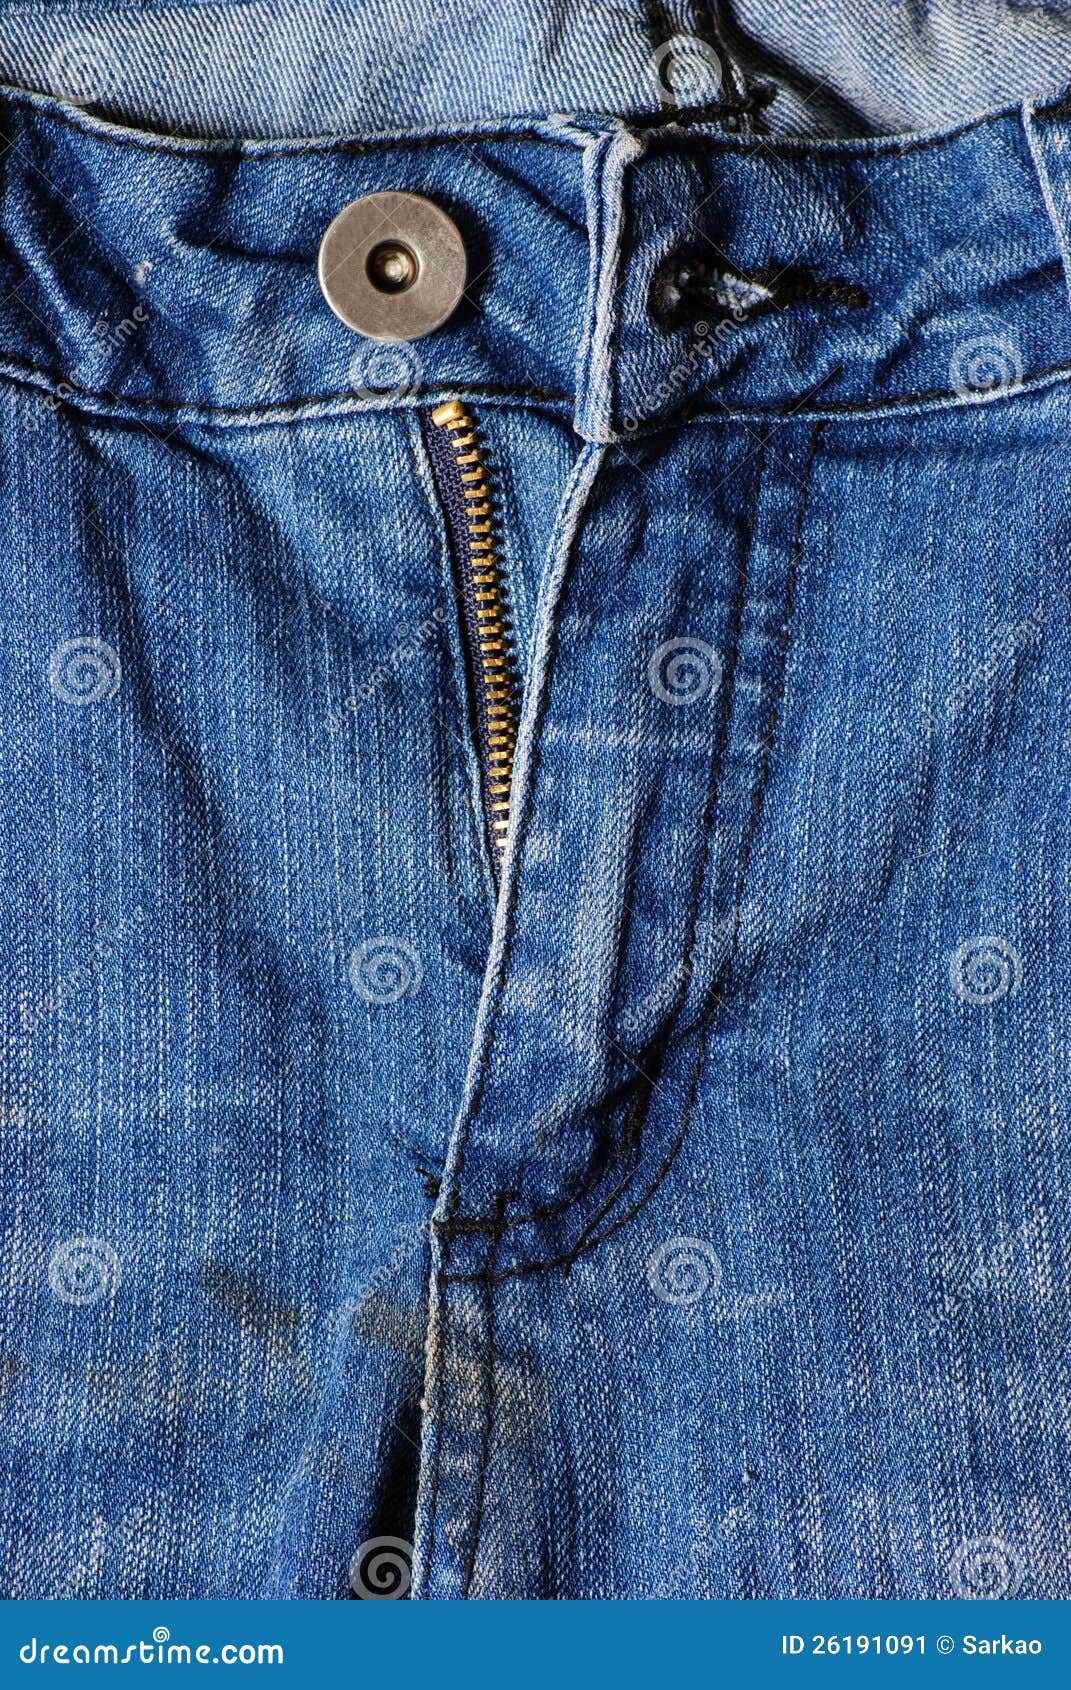 Jeans detail stock image. Image of clothing, cloth, denim - 26191091